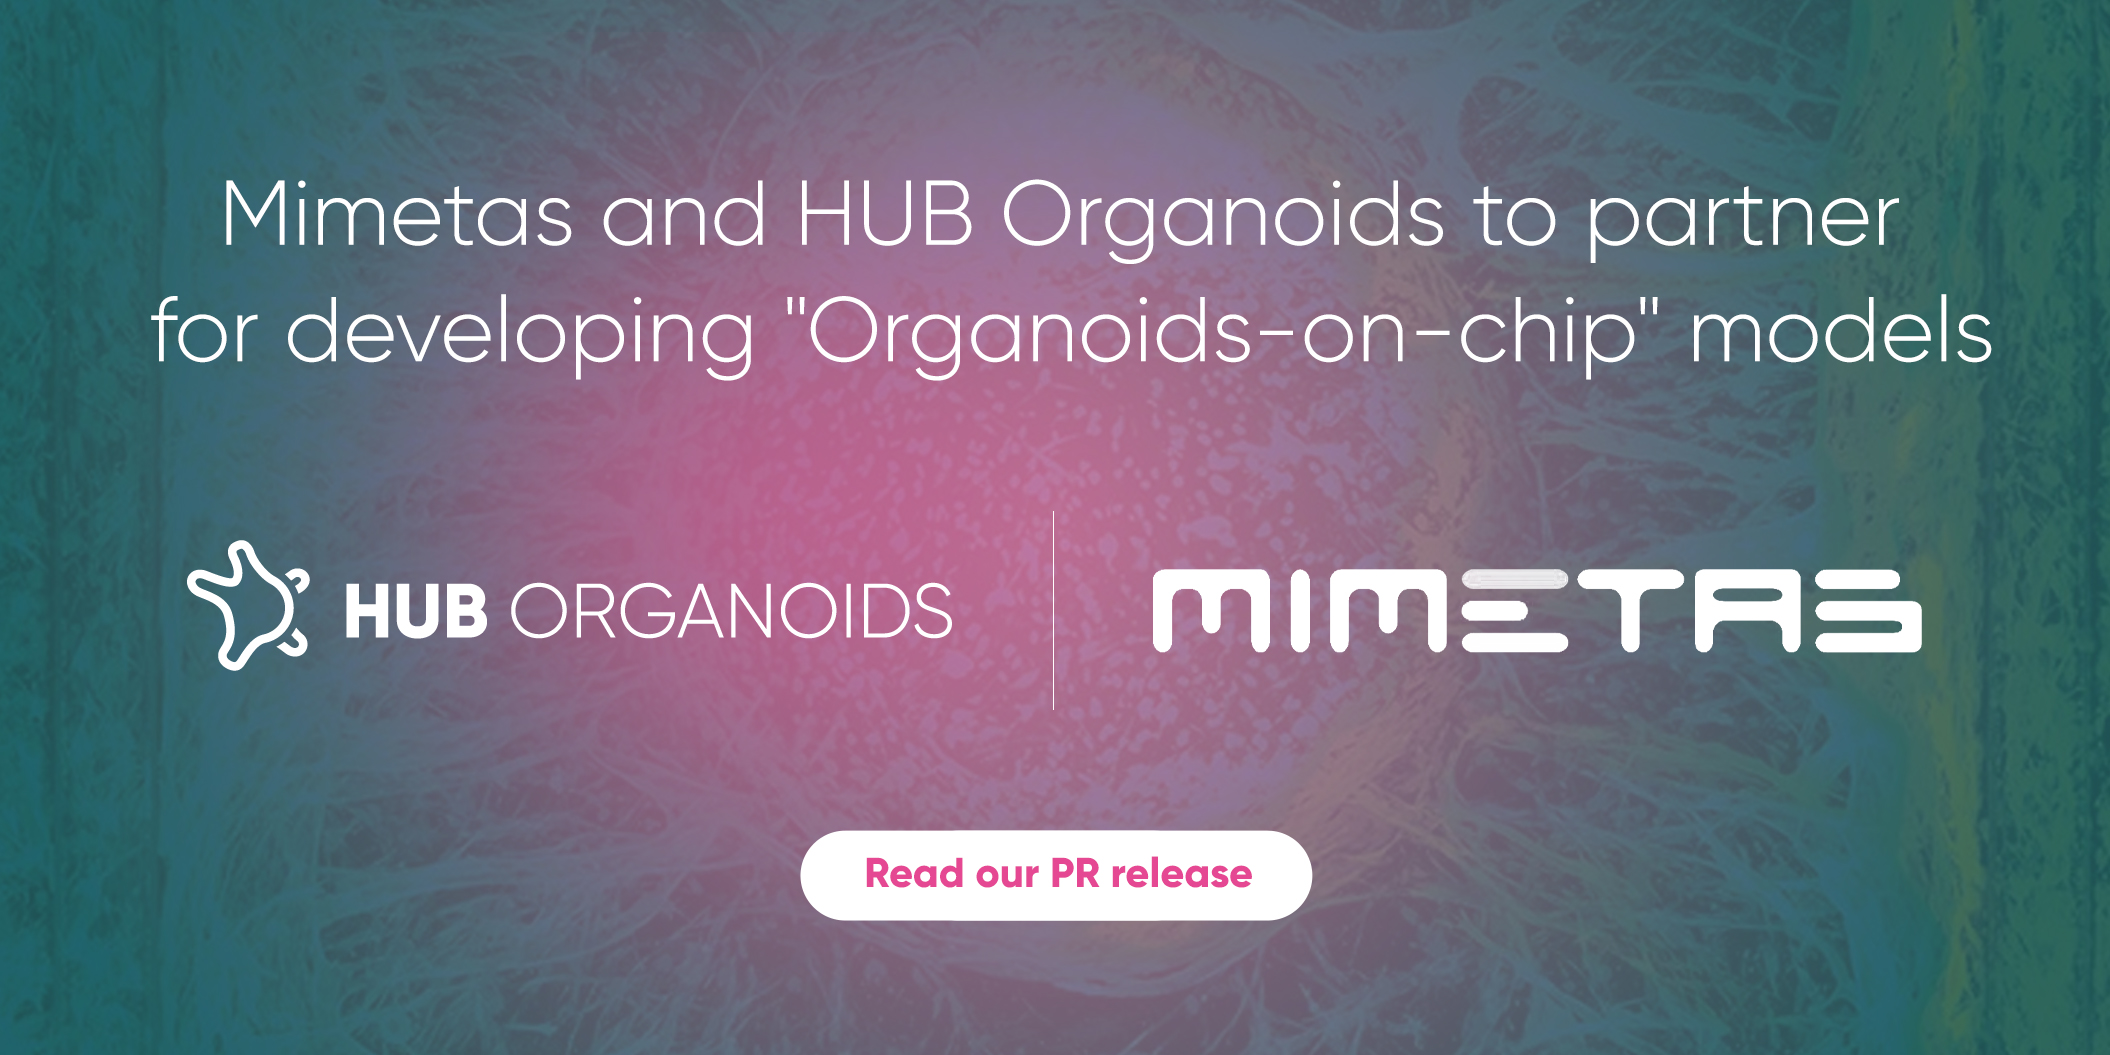 Organoids-on-a-chip